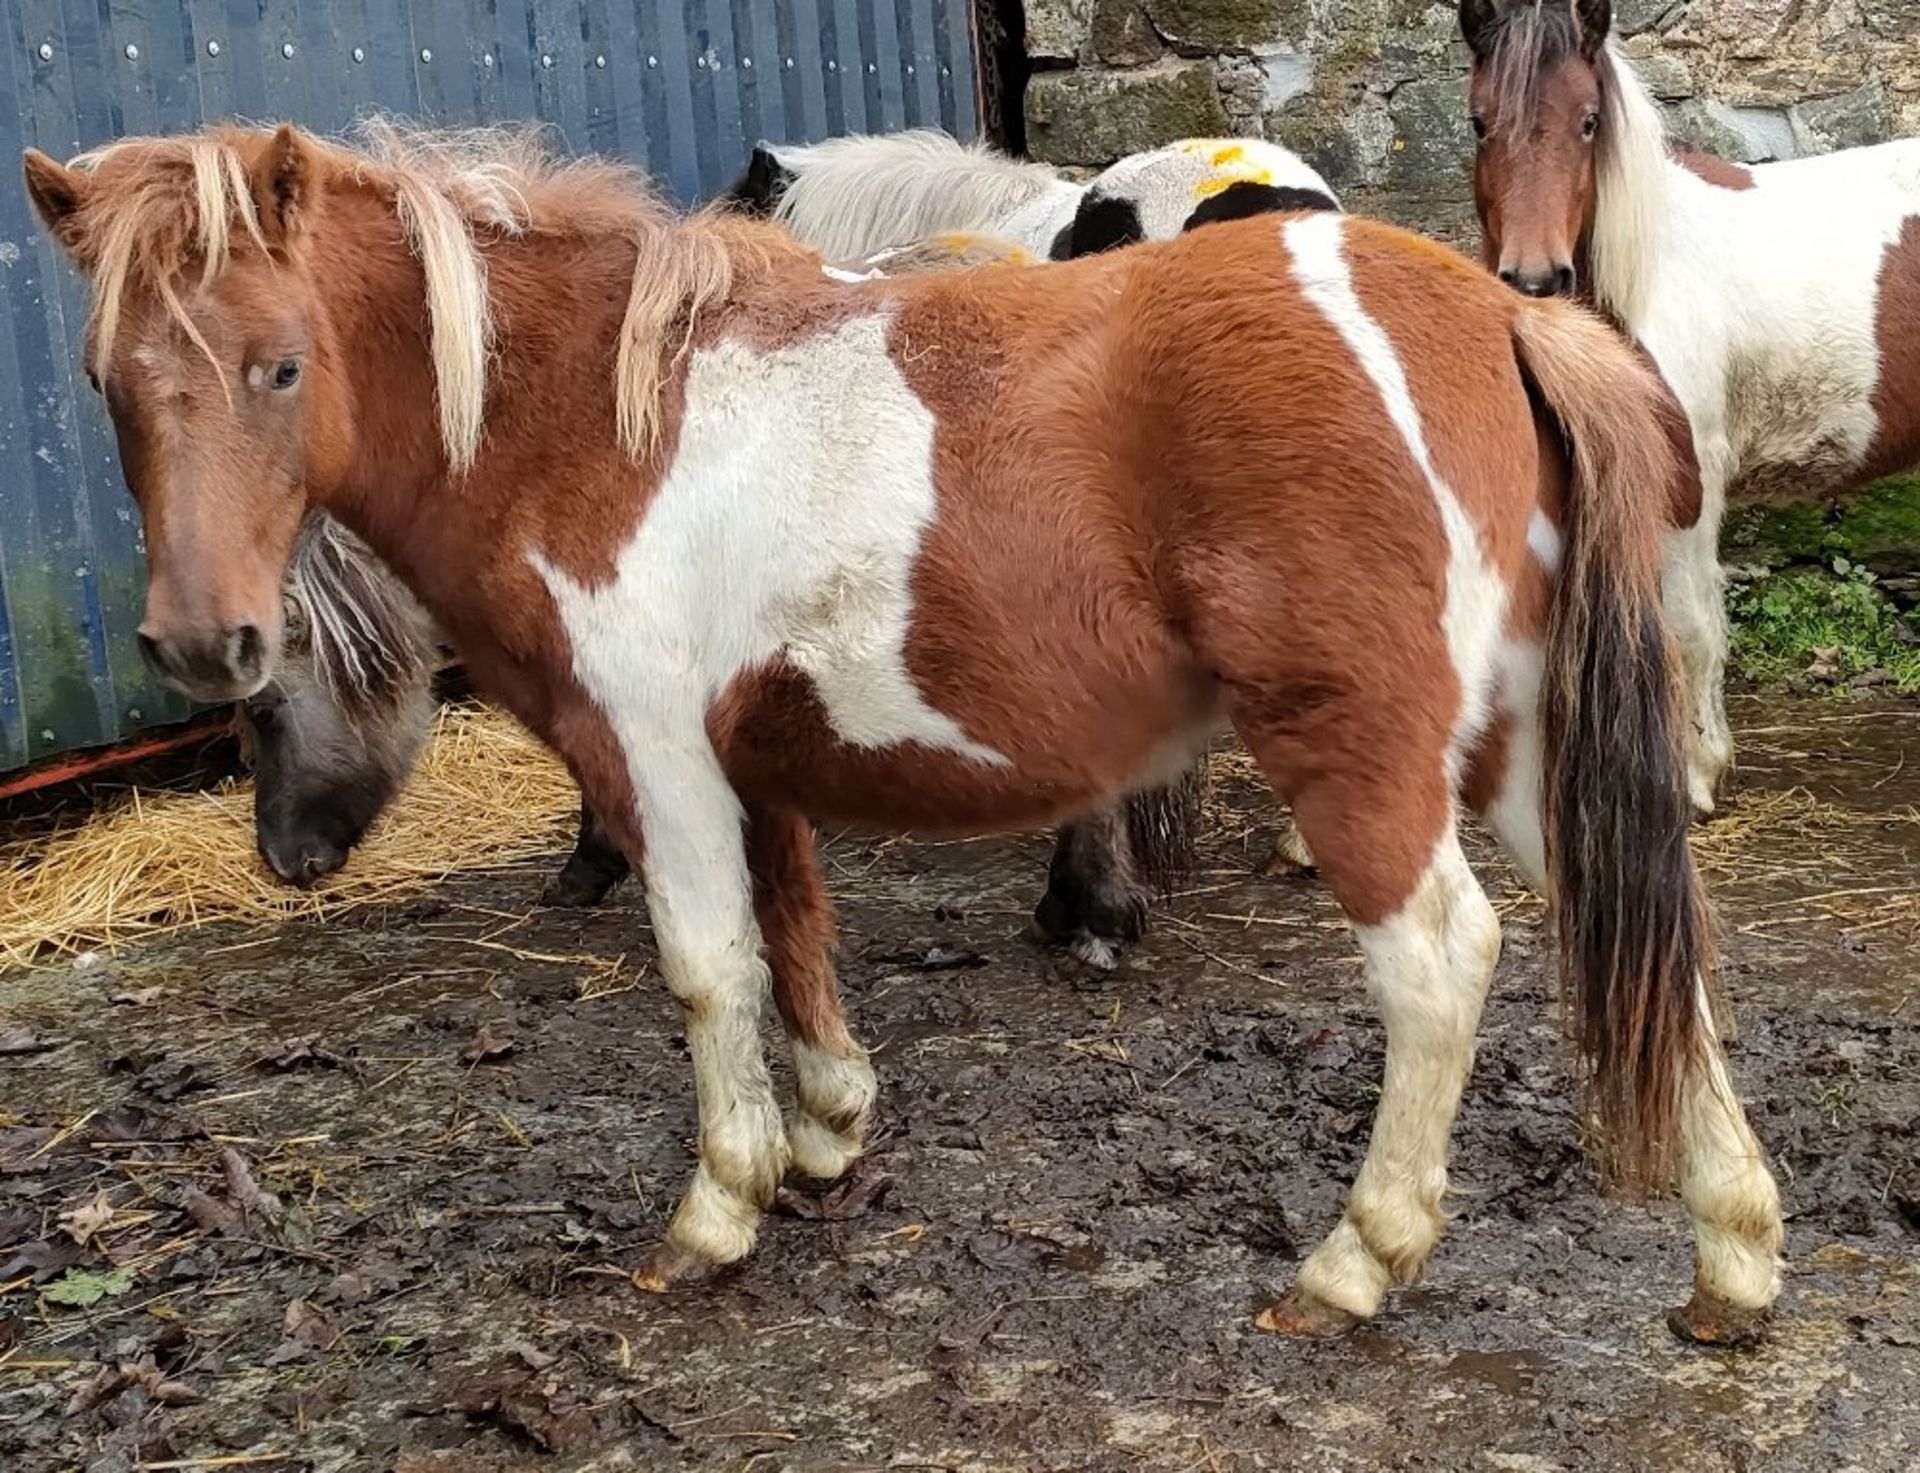 'GODSWORTHY' DARTMOOR HILL PONY SKEWBALD FILLY APPROX 18 MONTHS OLD - Image 3 of 6